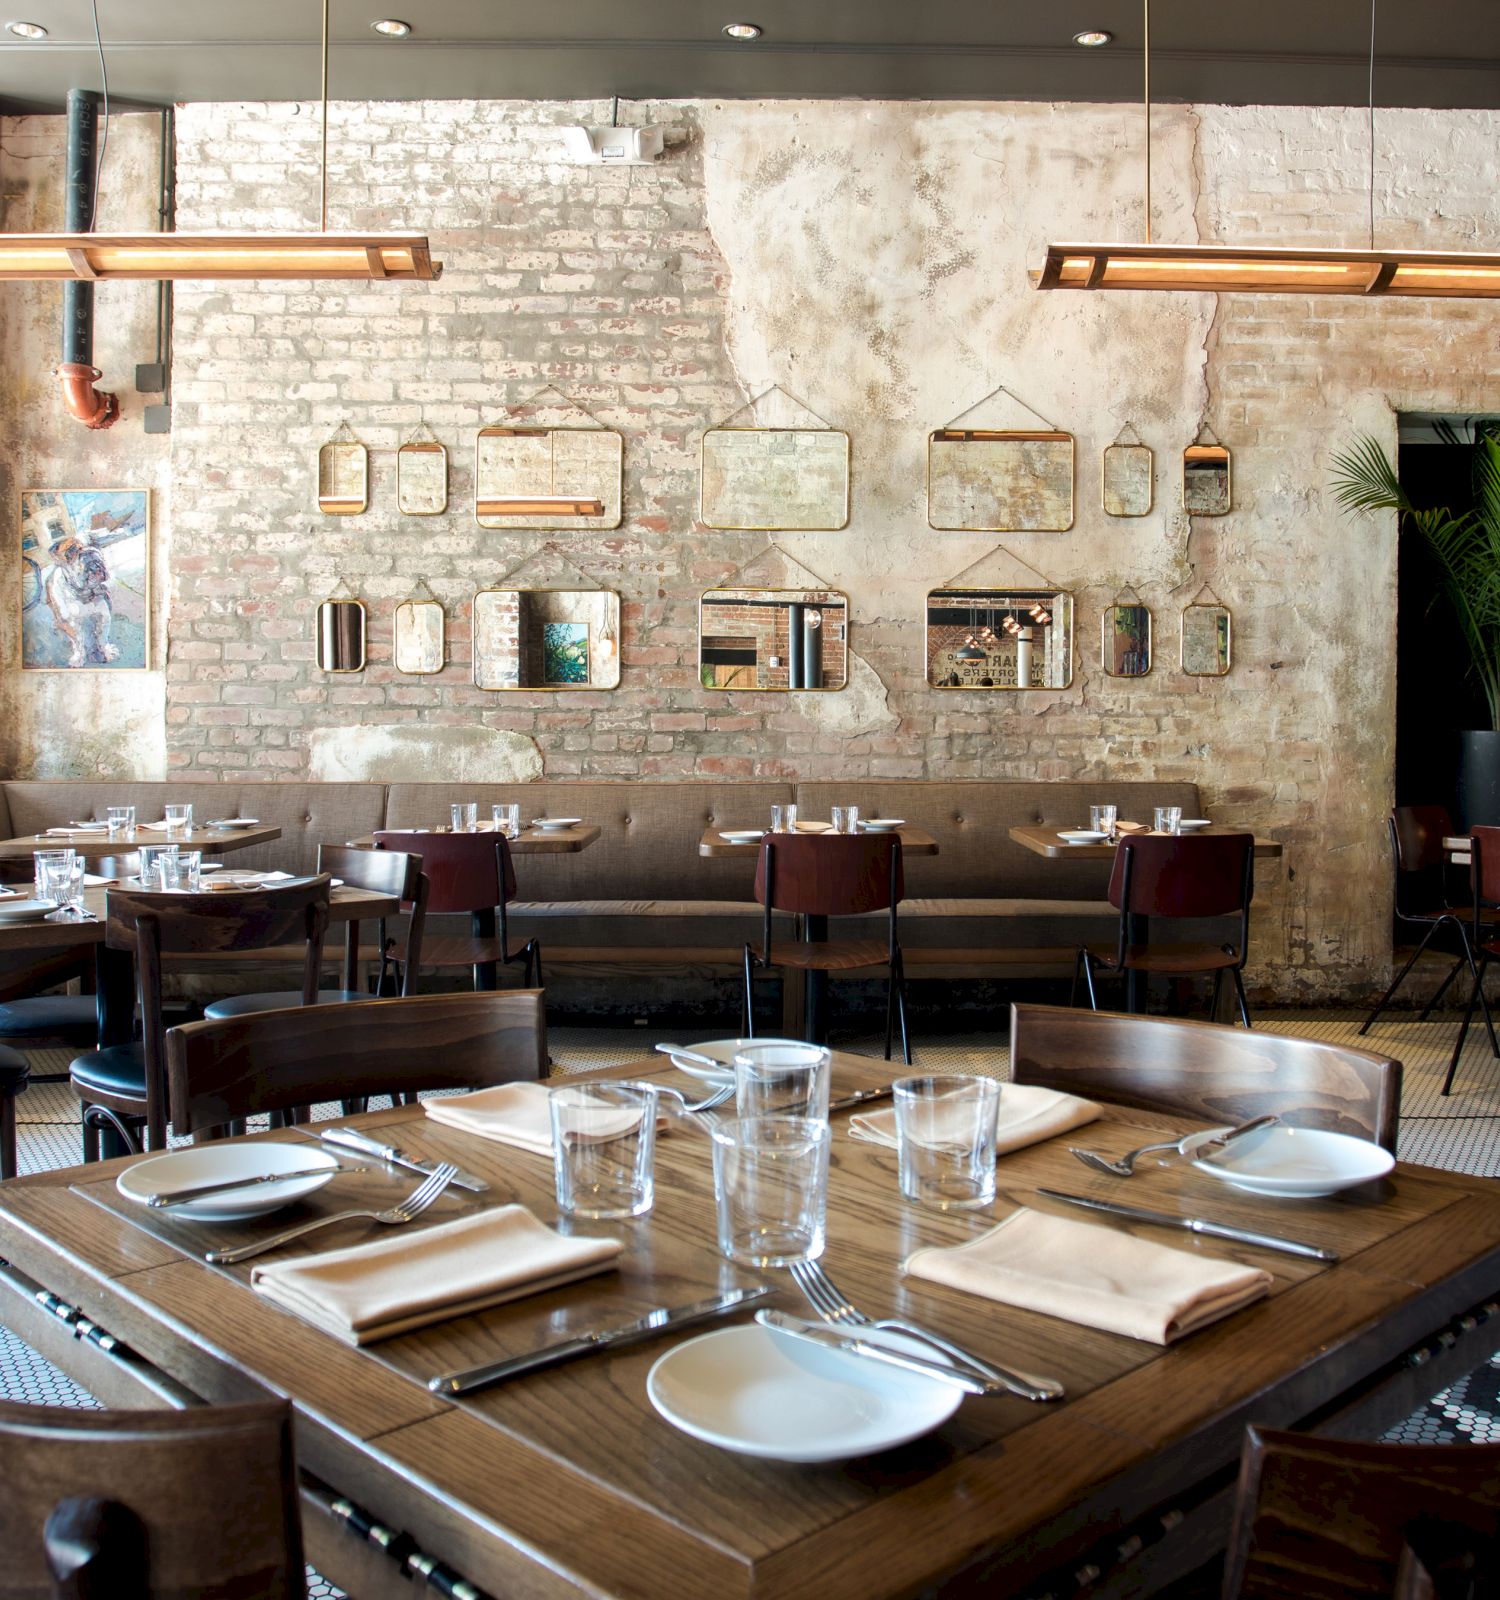 This image shows a stylish restaurant interior with neatly set tables, vintage decor on the exposed brick wall, and a cozy, inviting atmosphere.